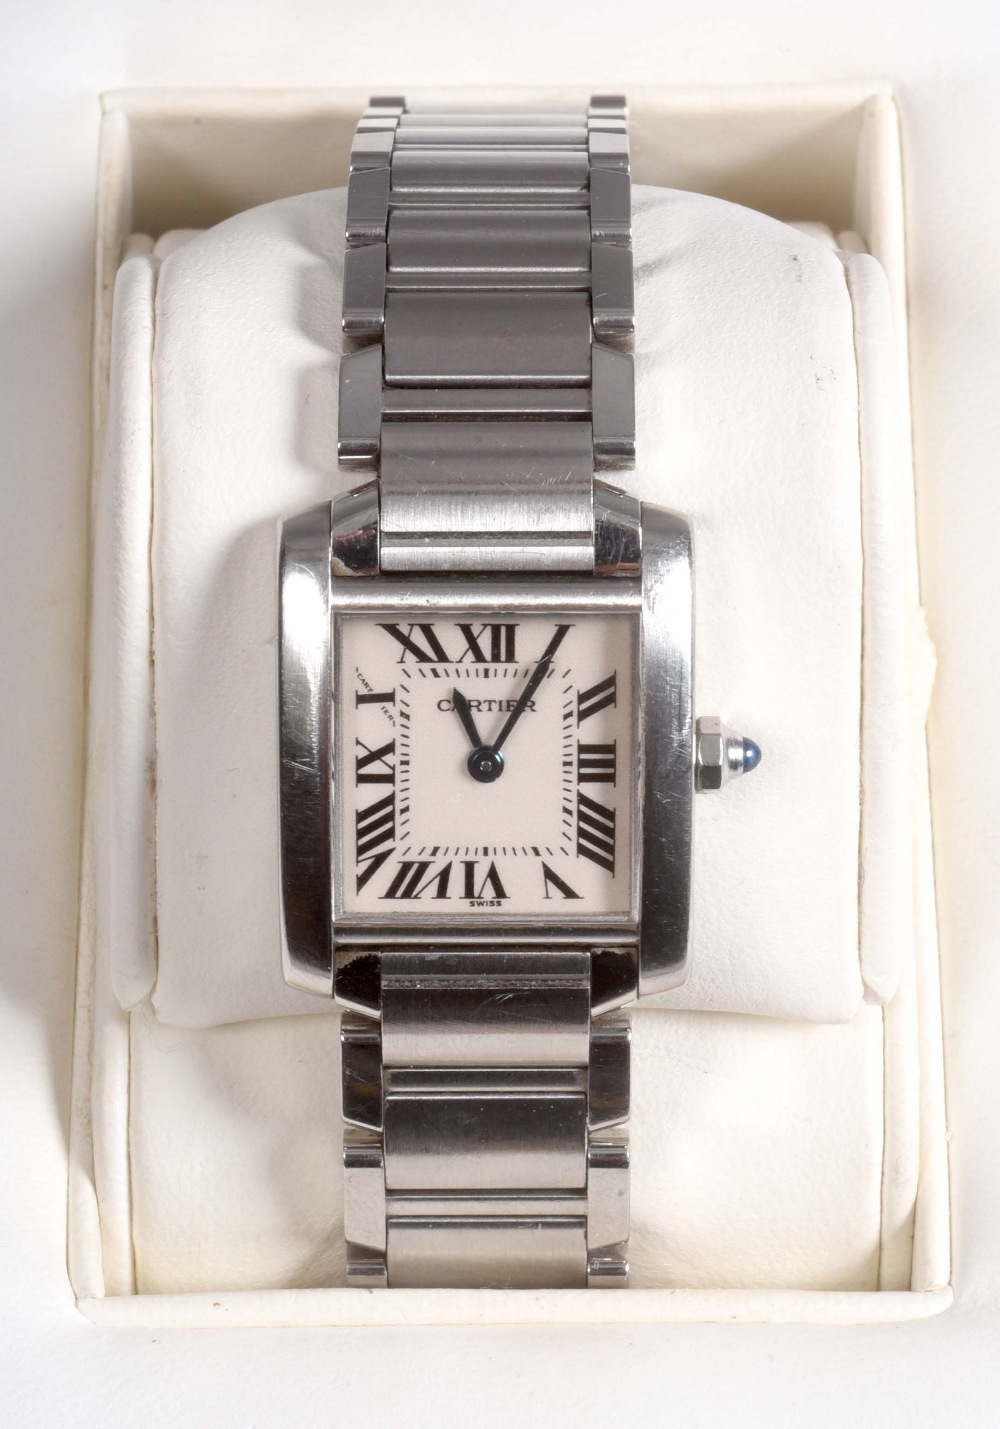 A Cartier ladies steel wrist watch and strap, the square face with Roman numerals chapter ring.